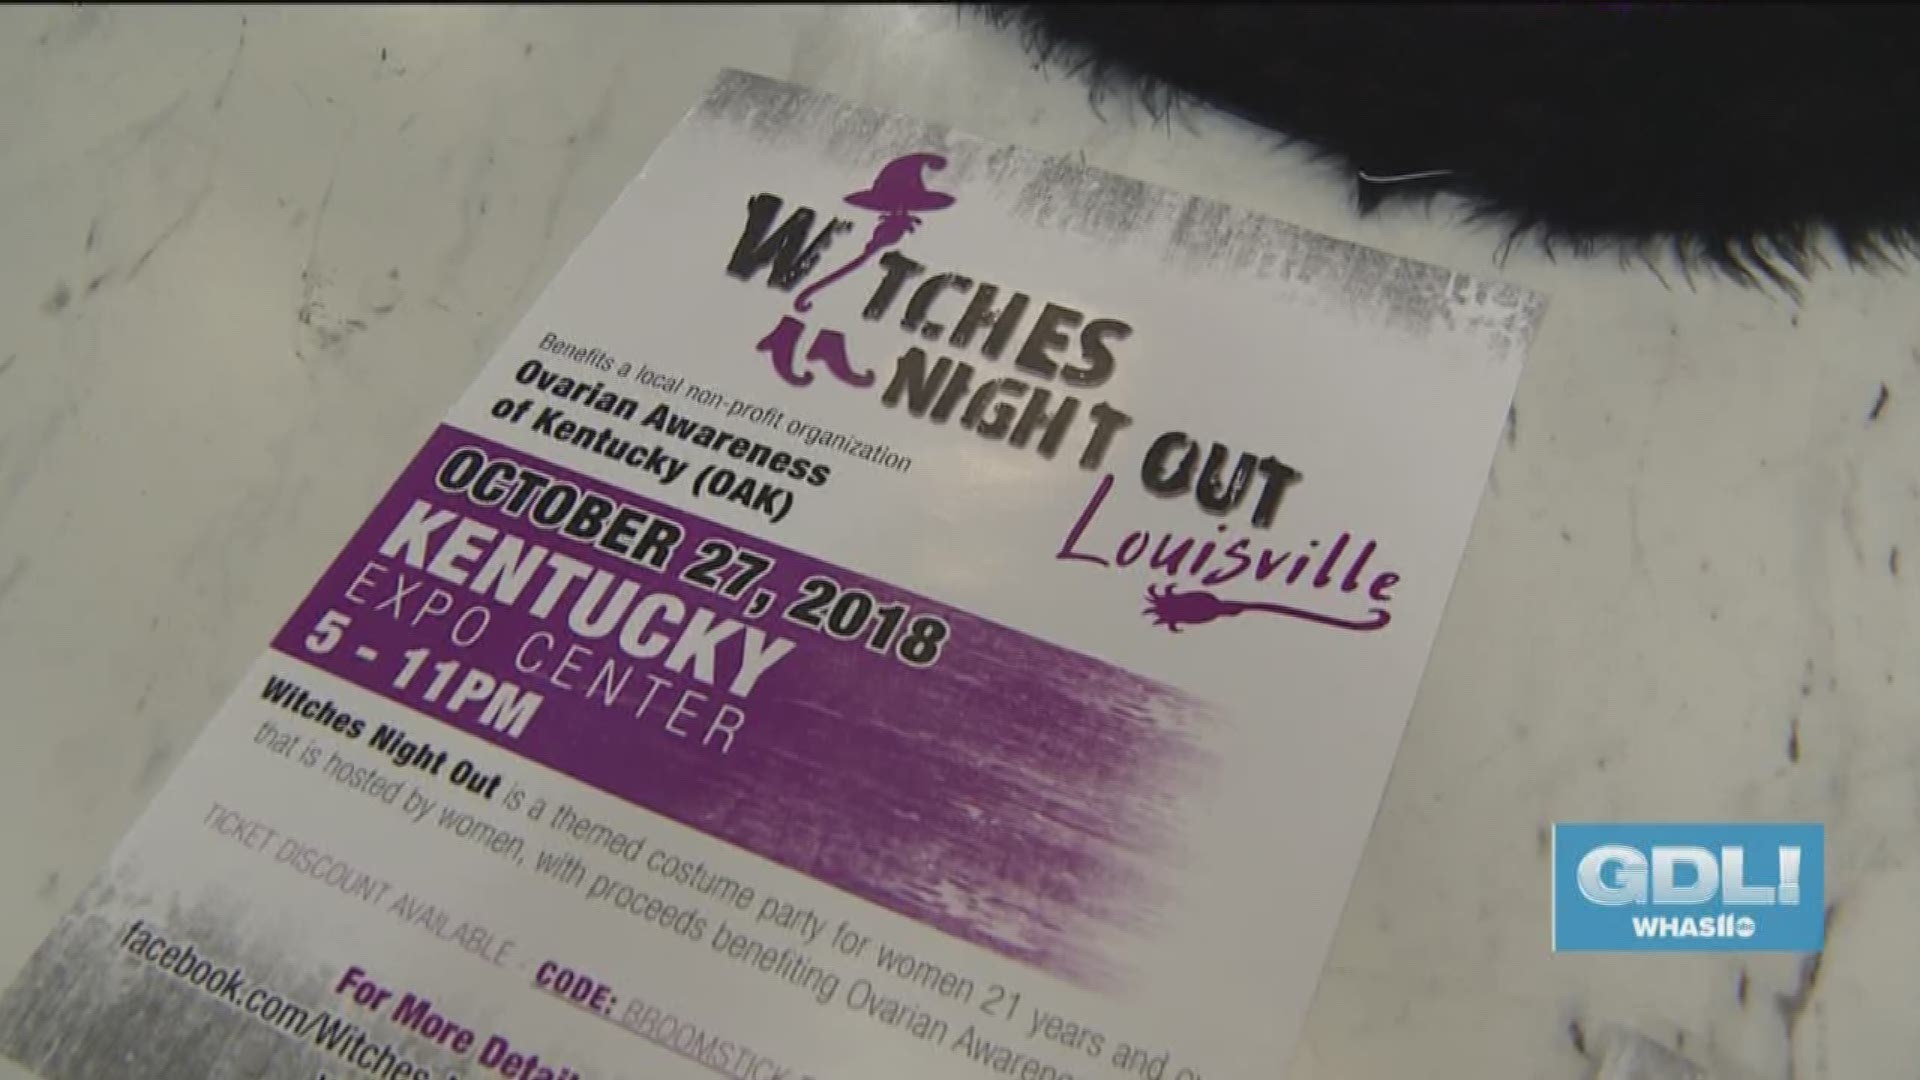 Witches Night Out is October 27, 2018 from 6-11 PM. Go to WitchesNightLouisville.org for more information.